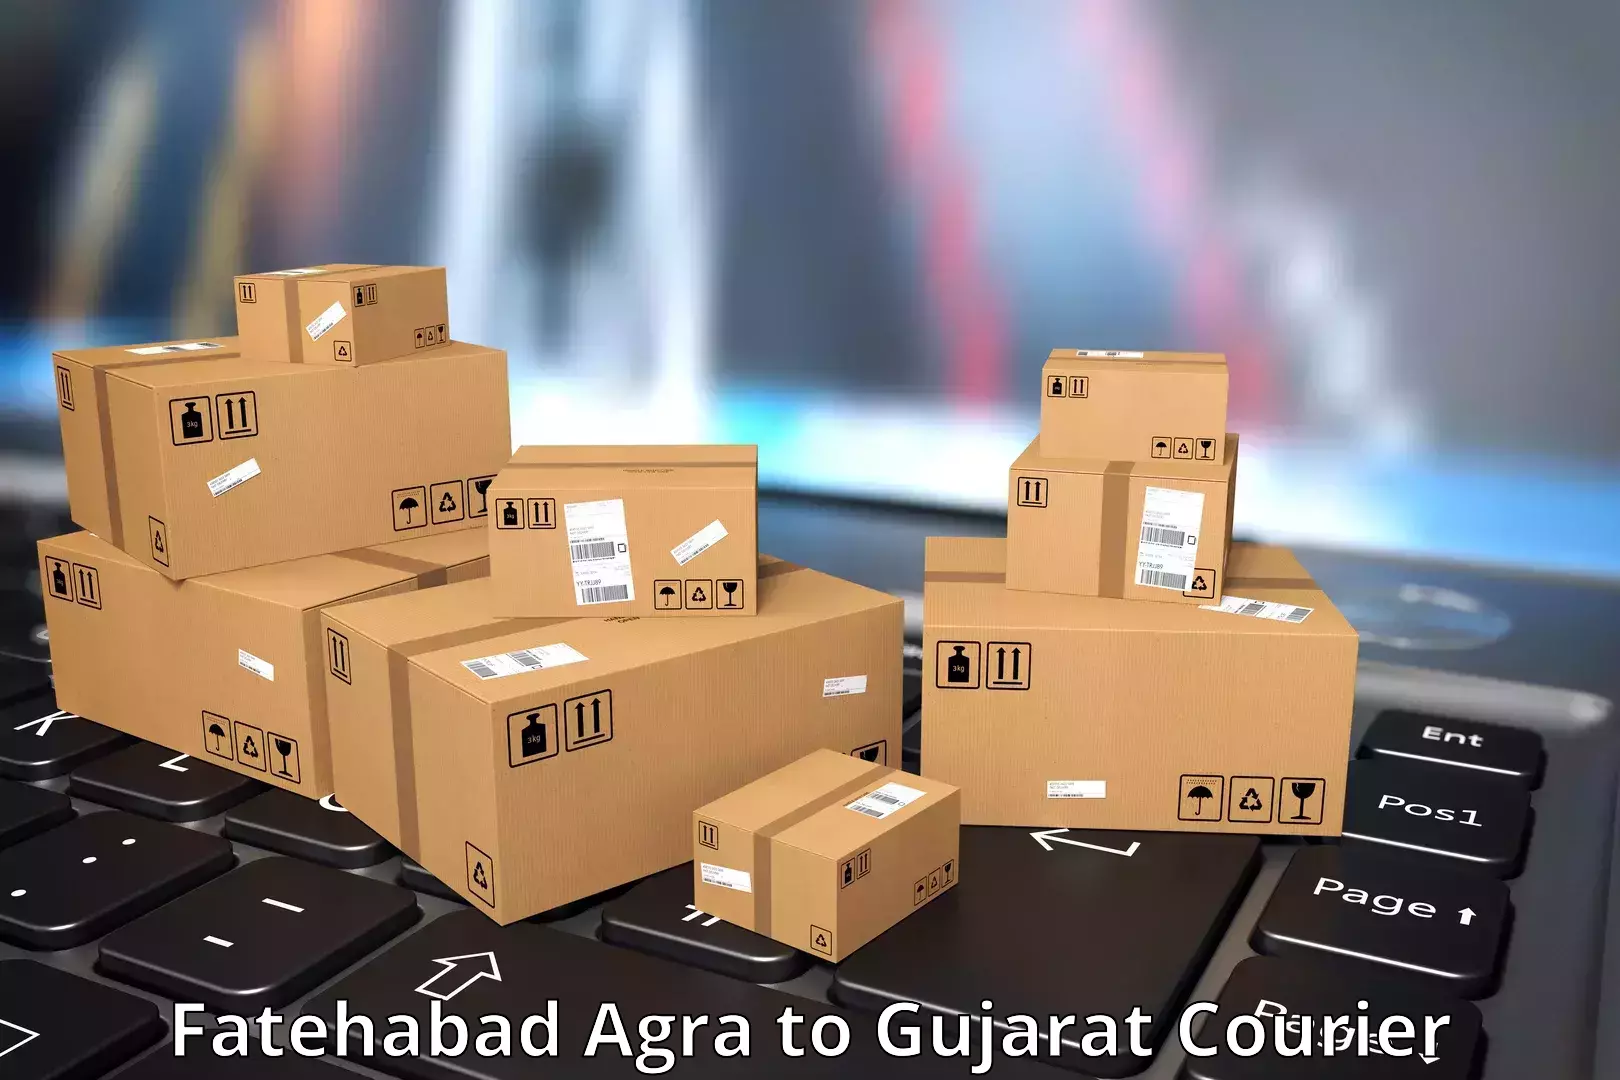 User-friendly courier app Fatehabad Agra to Khedbrahma